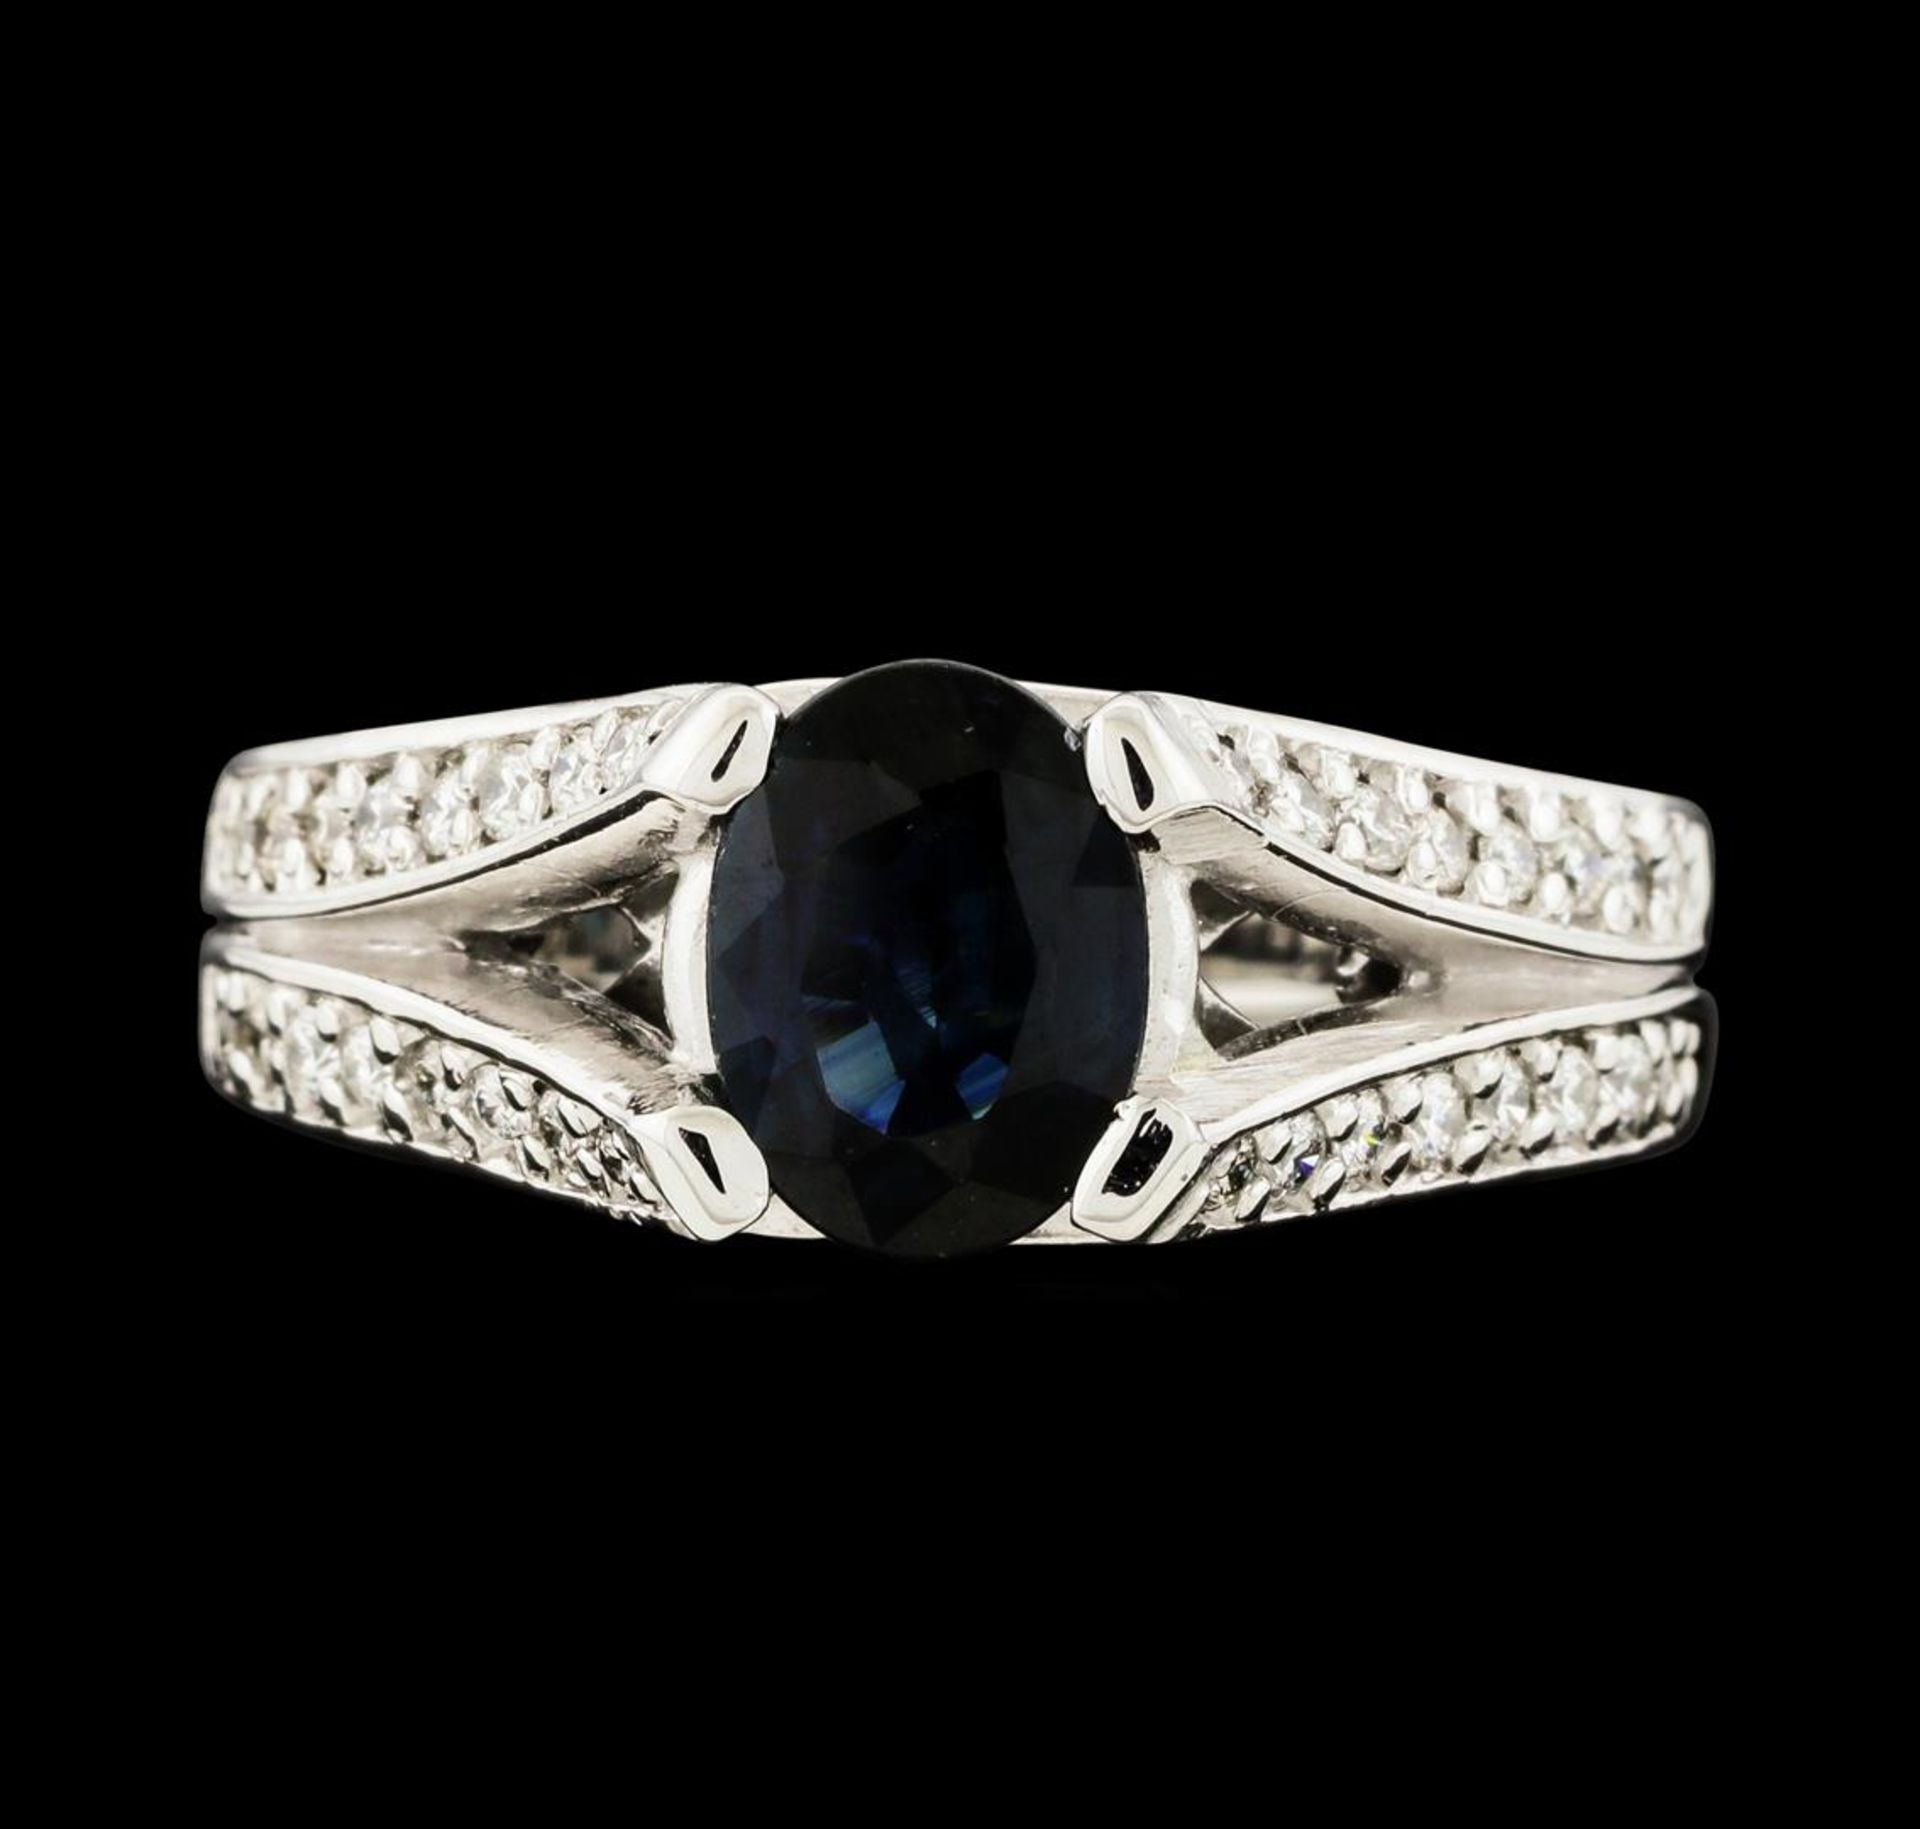 1.61 ctw Sapphire and Diamond Ring - 14KT White Gold - Image 4 of 7